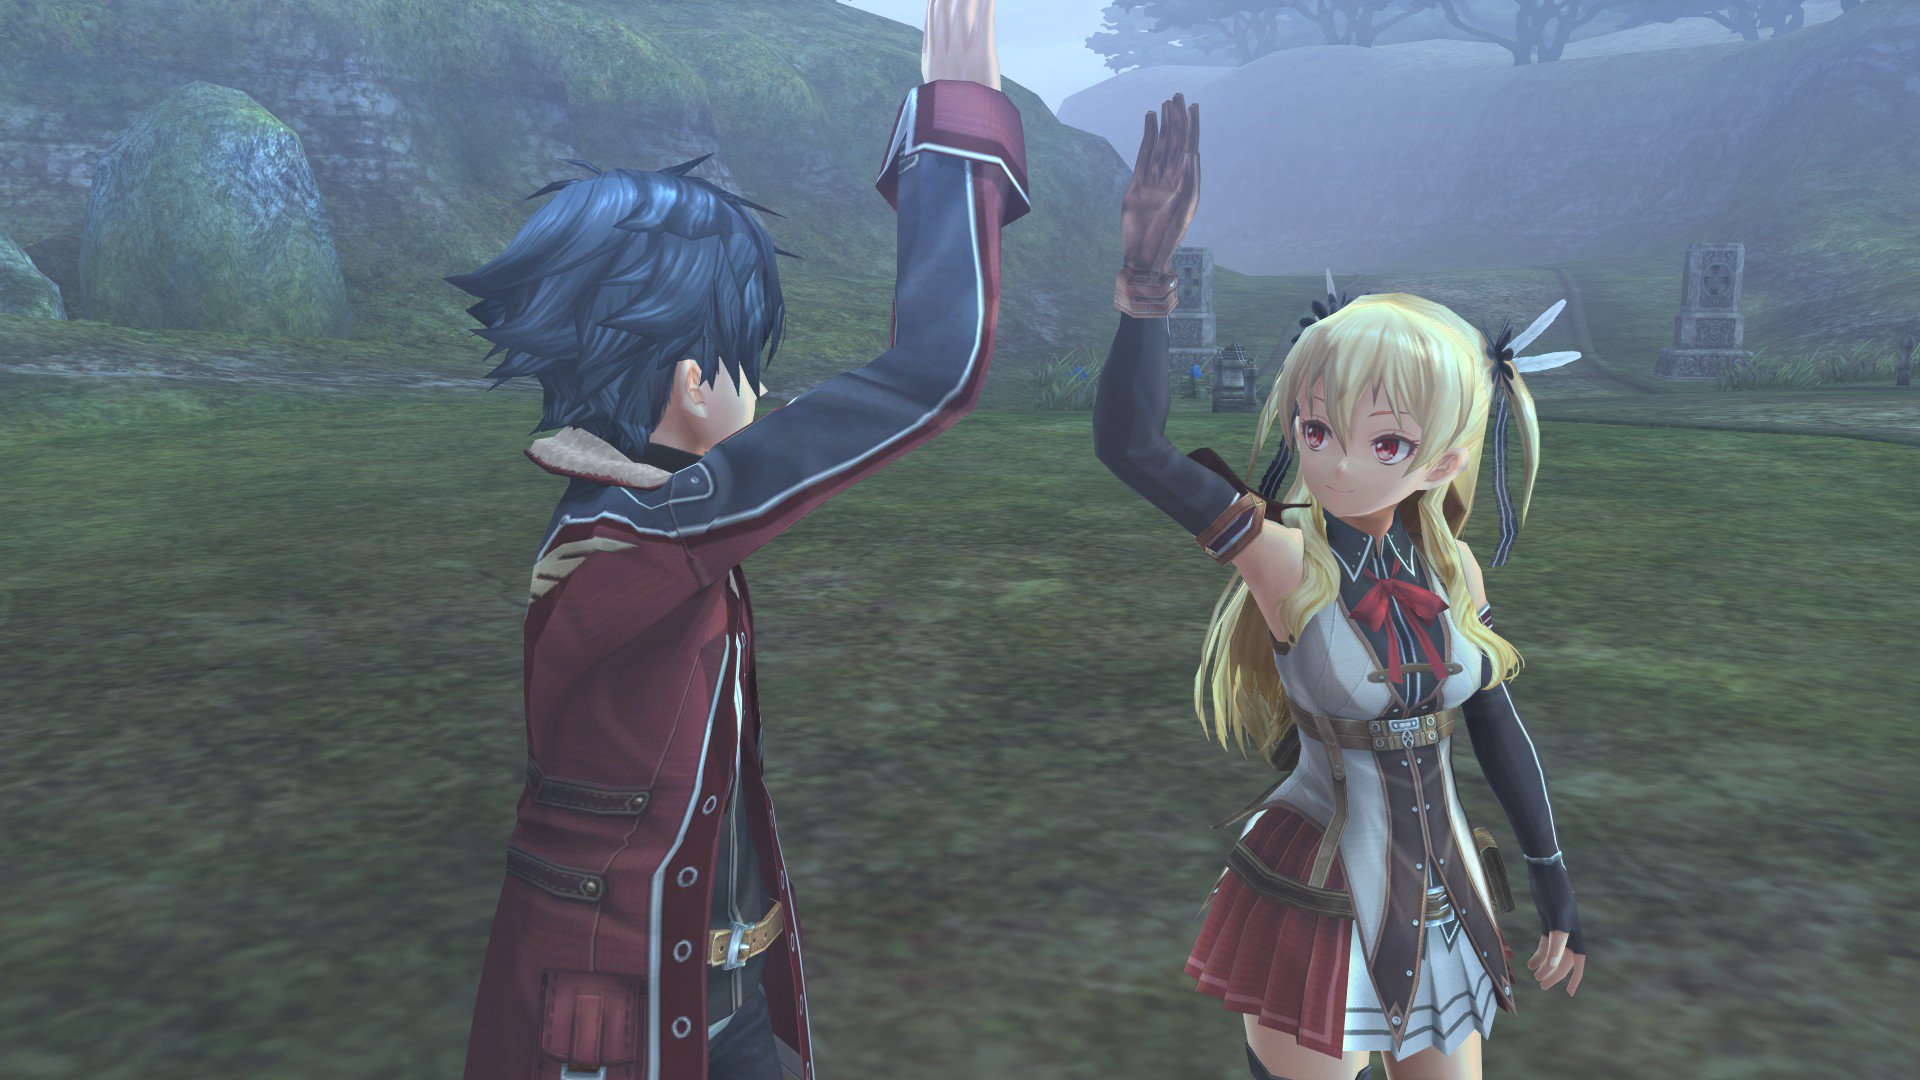 The Legend of Heroes Trails of Cold Steel II 3